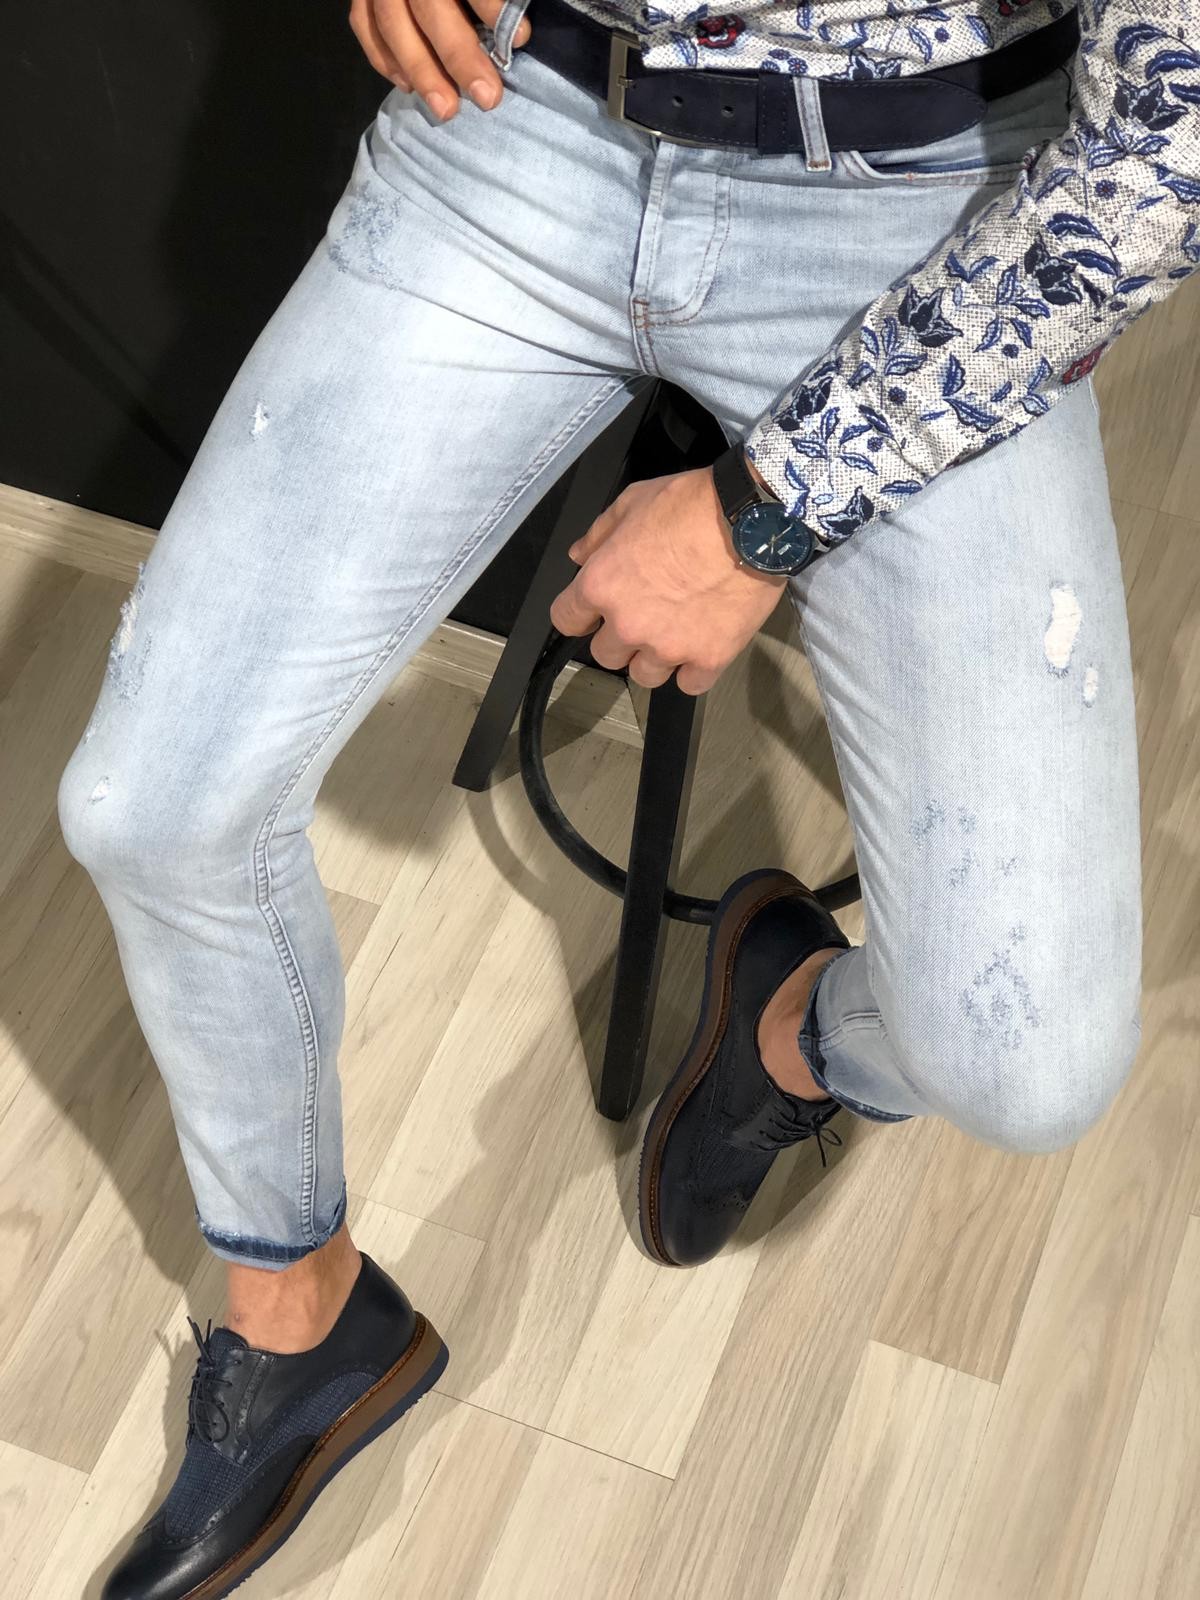 3 Denim Jeans Every Man Should Have in Their Wardrobe - Styled By Sally